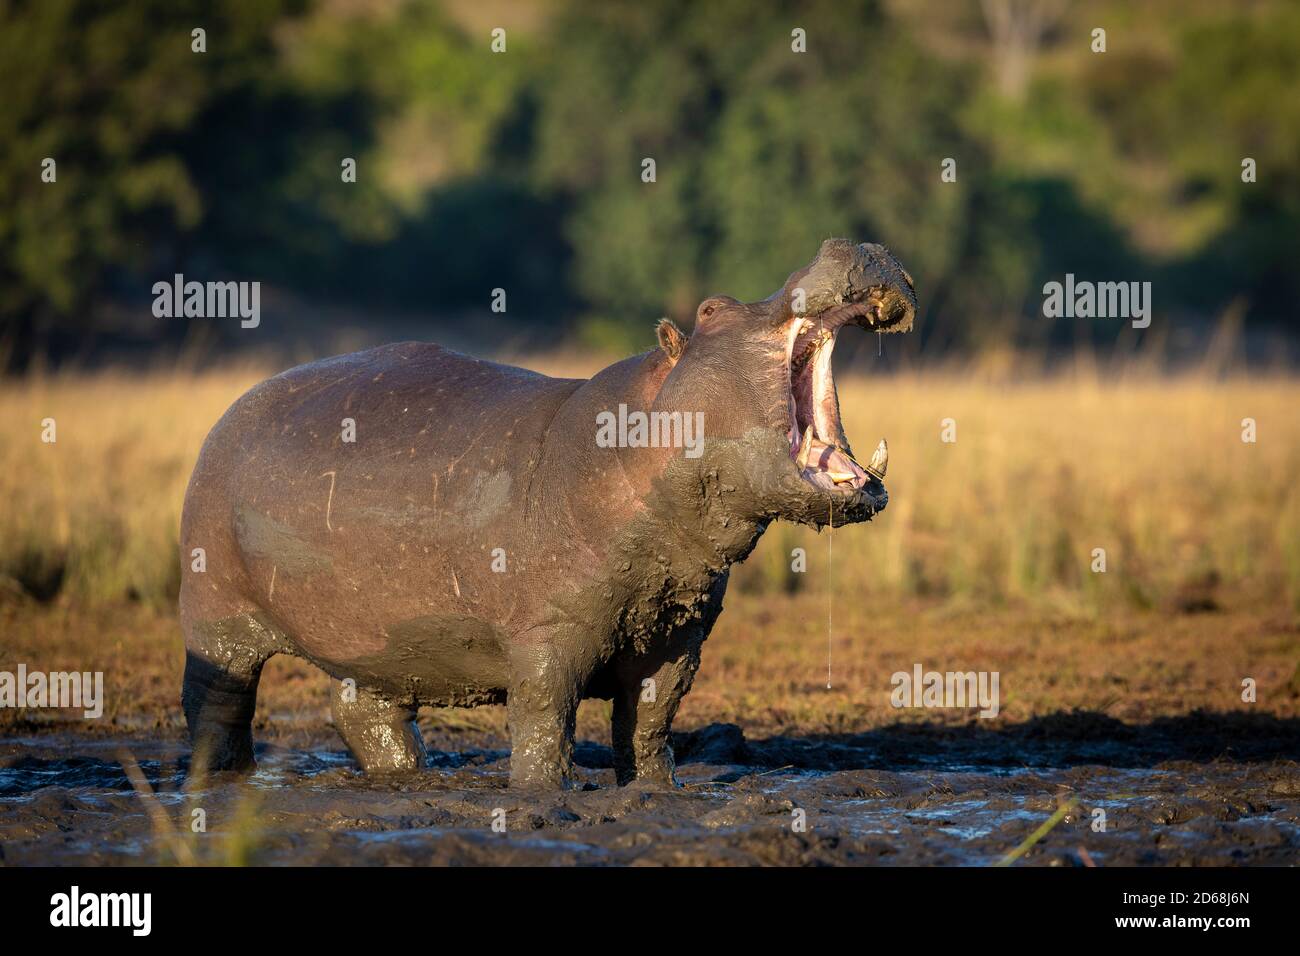 Big and muddy adult hippo standing in mud out of water with its mouth open in early morning sunlight in Chobe River in Botswana Stock Photo